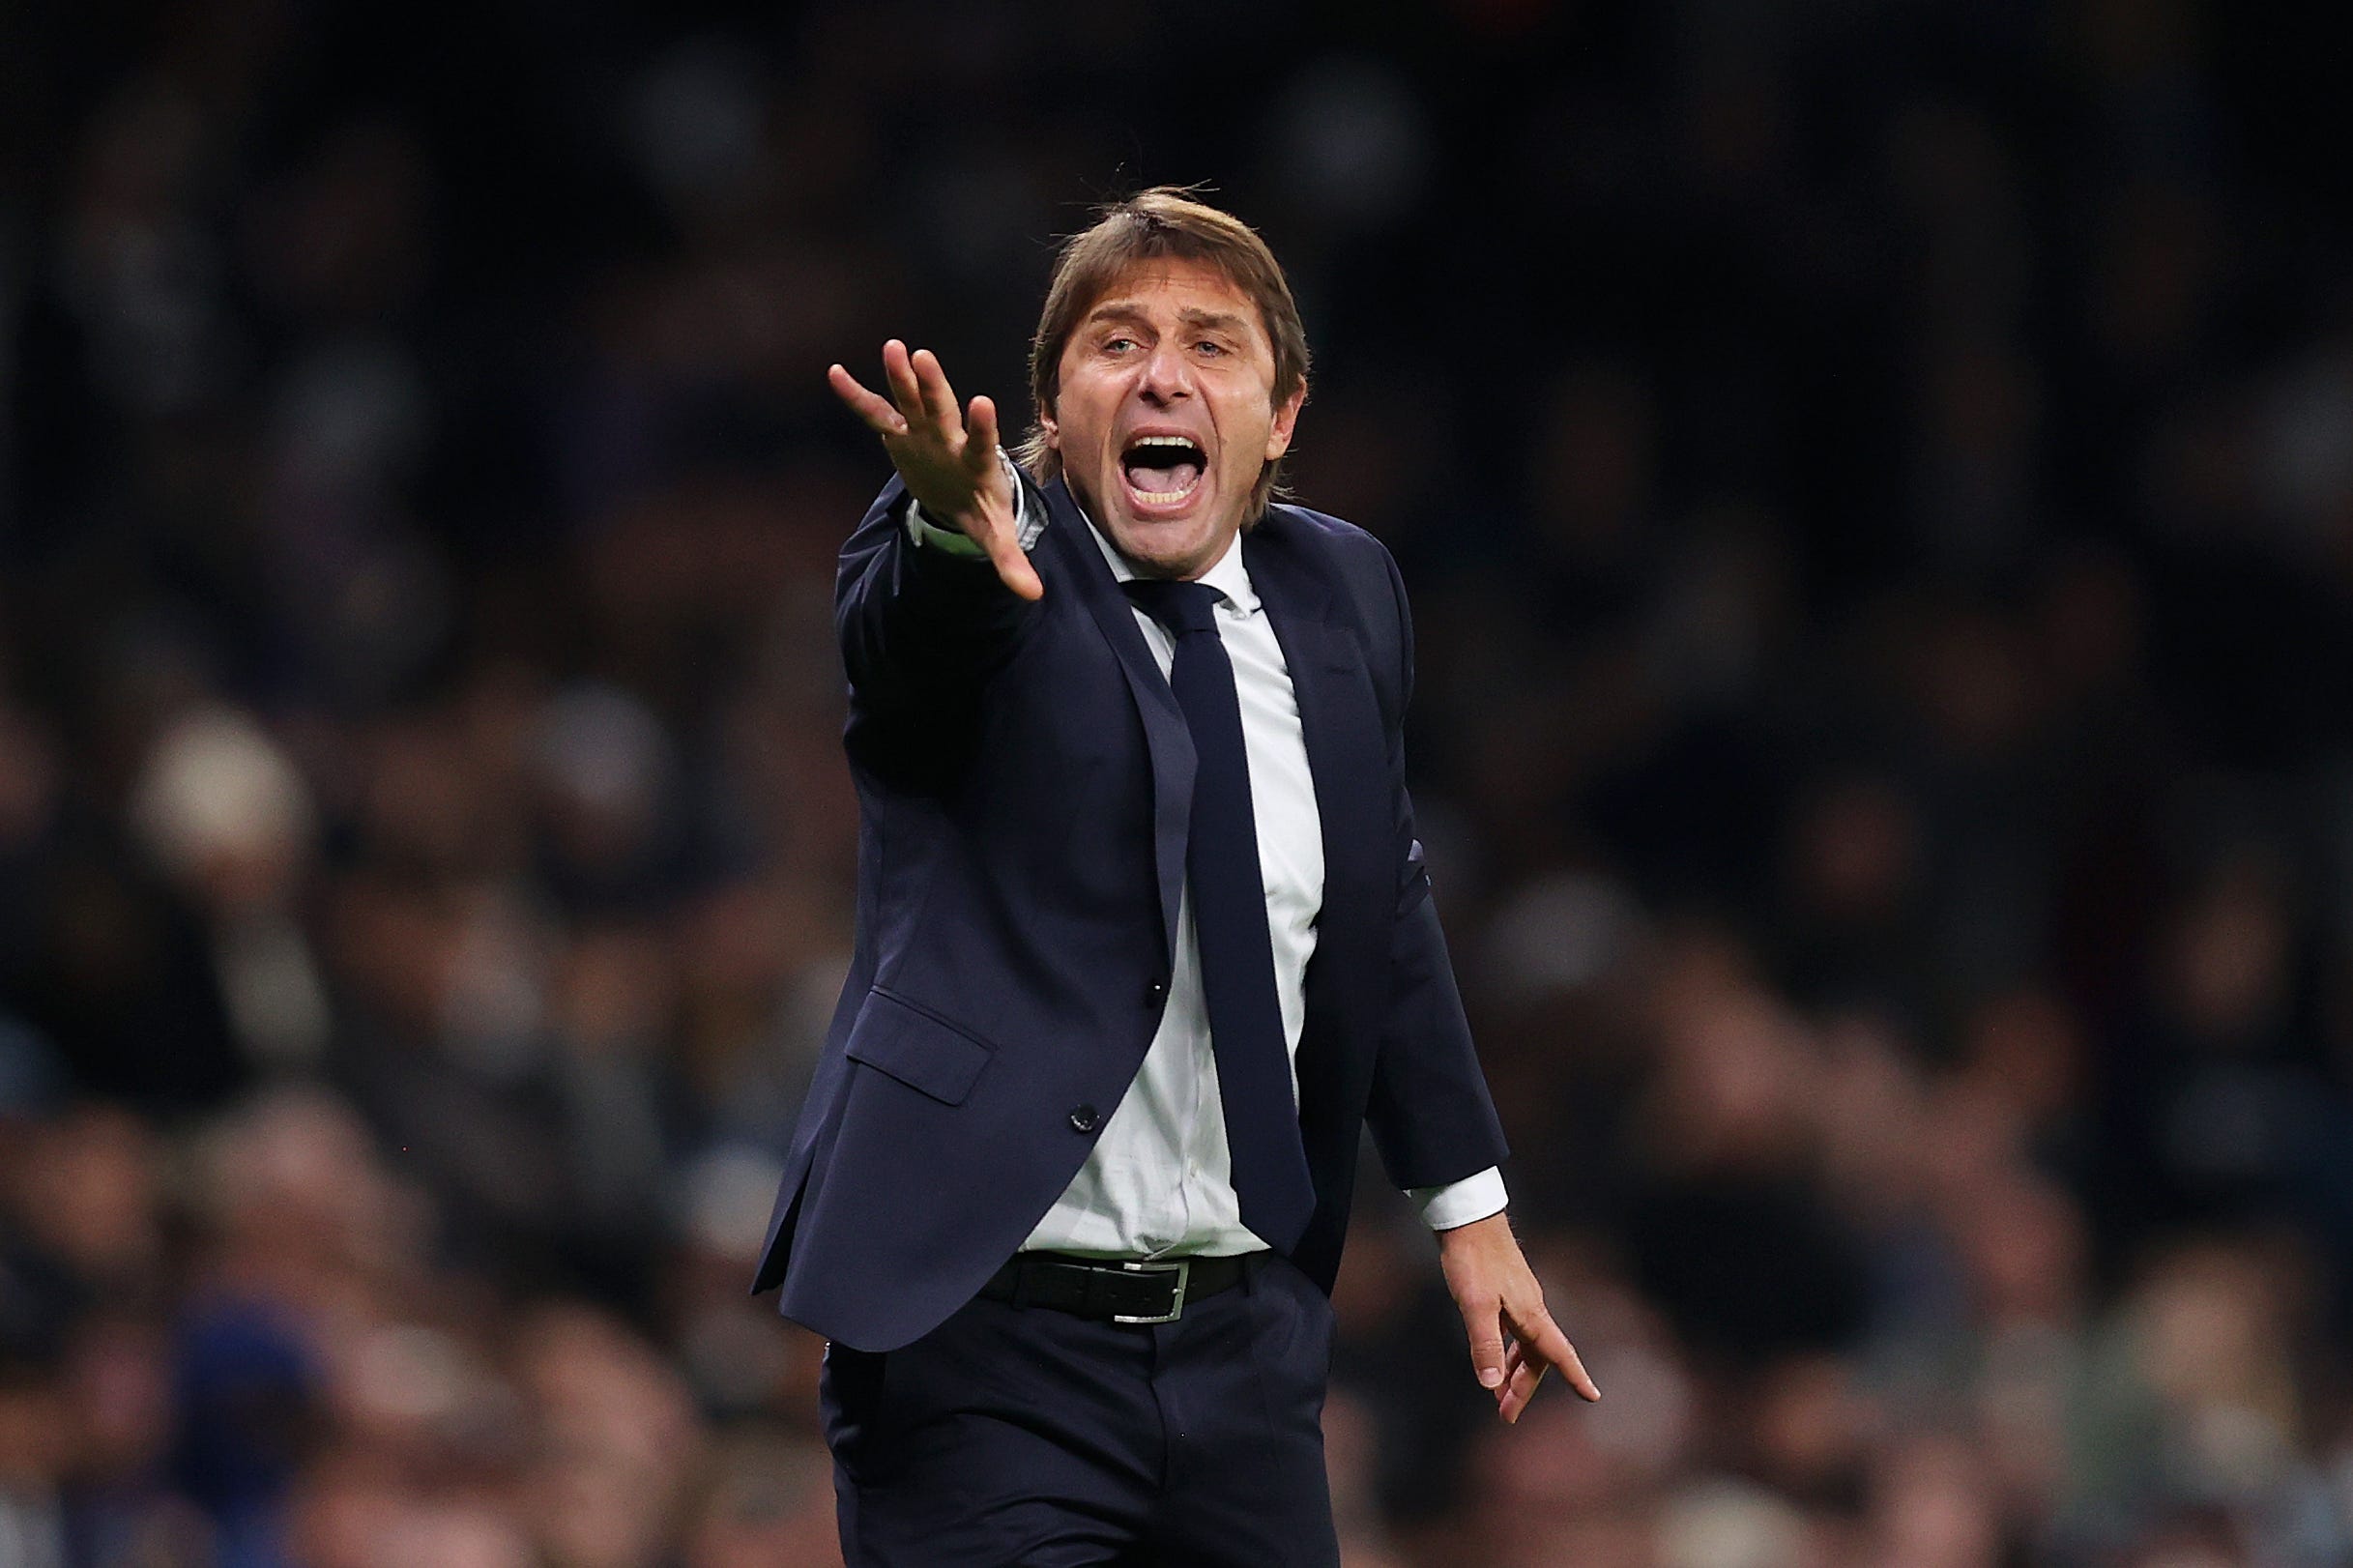 The time might be ripe for Napoli to finally land Antonio Conte, coronating their lengthy chase, if he’s really adamant about returning to Serie A.